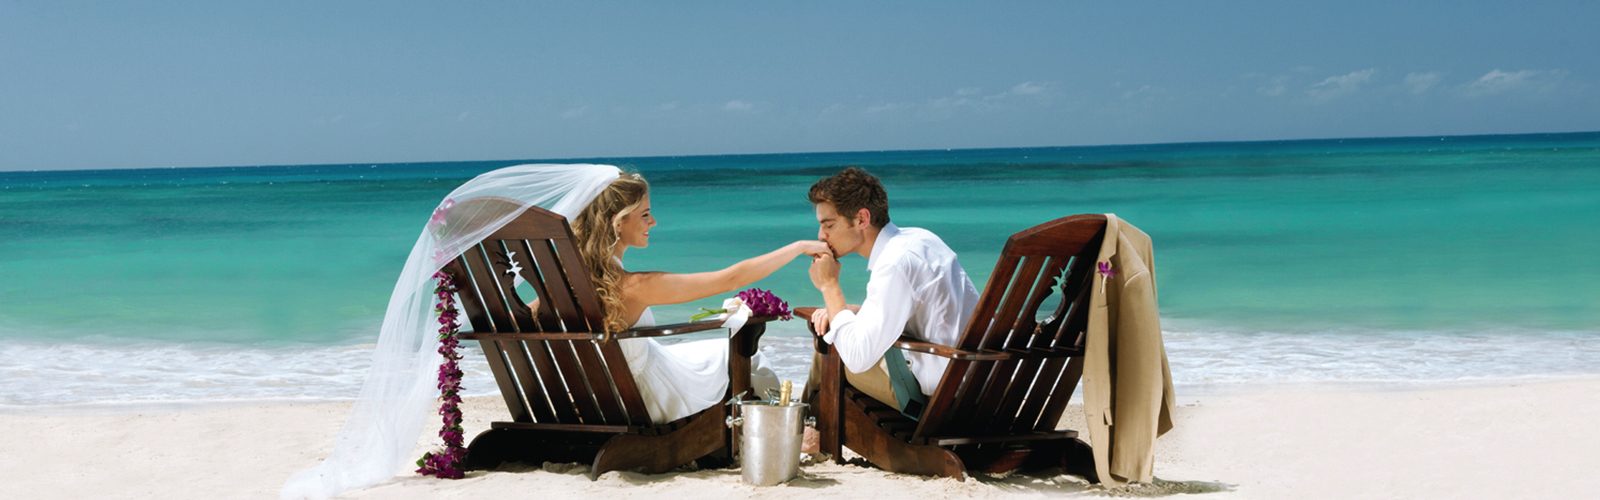 Beach Weddings Abroad Thinking Of Tying The Knot Abroad? Header